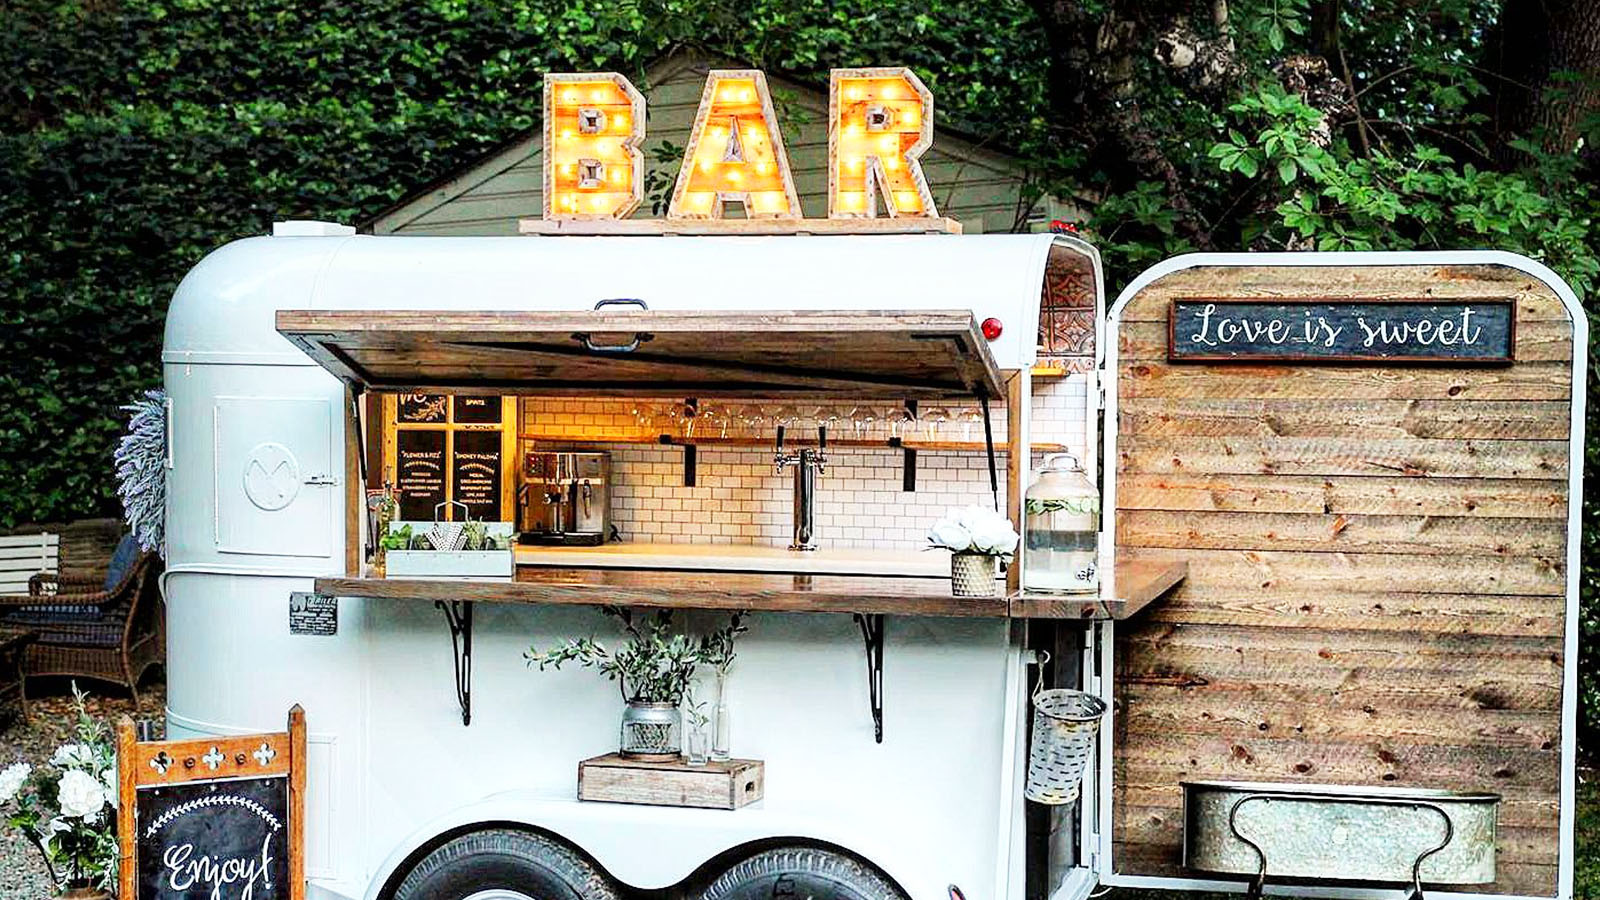 Every party needs a good bar! If you love to shake things up, you bring the drinks and we'll find you the perfect events to take your mobile bar to the next level.